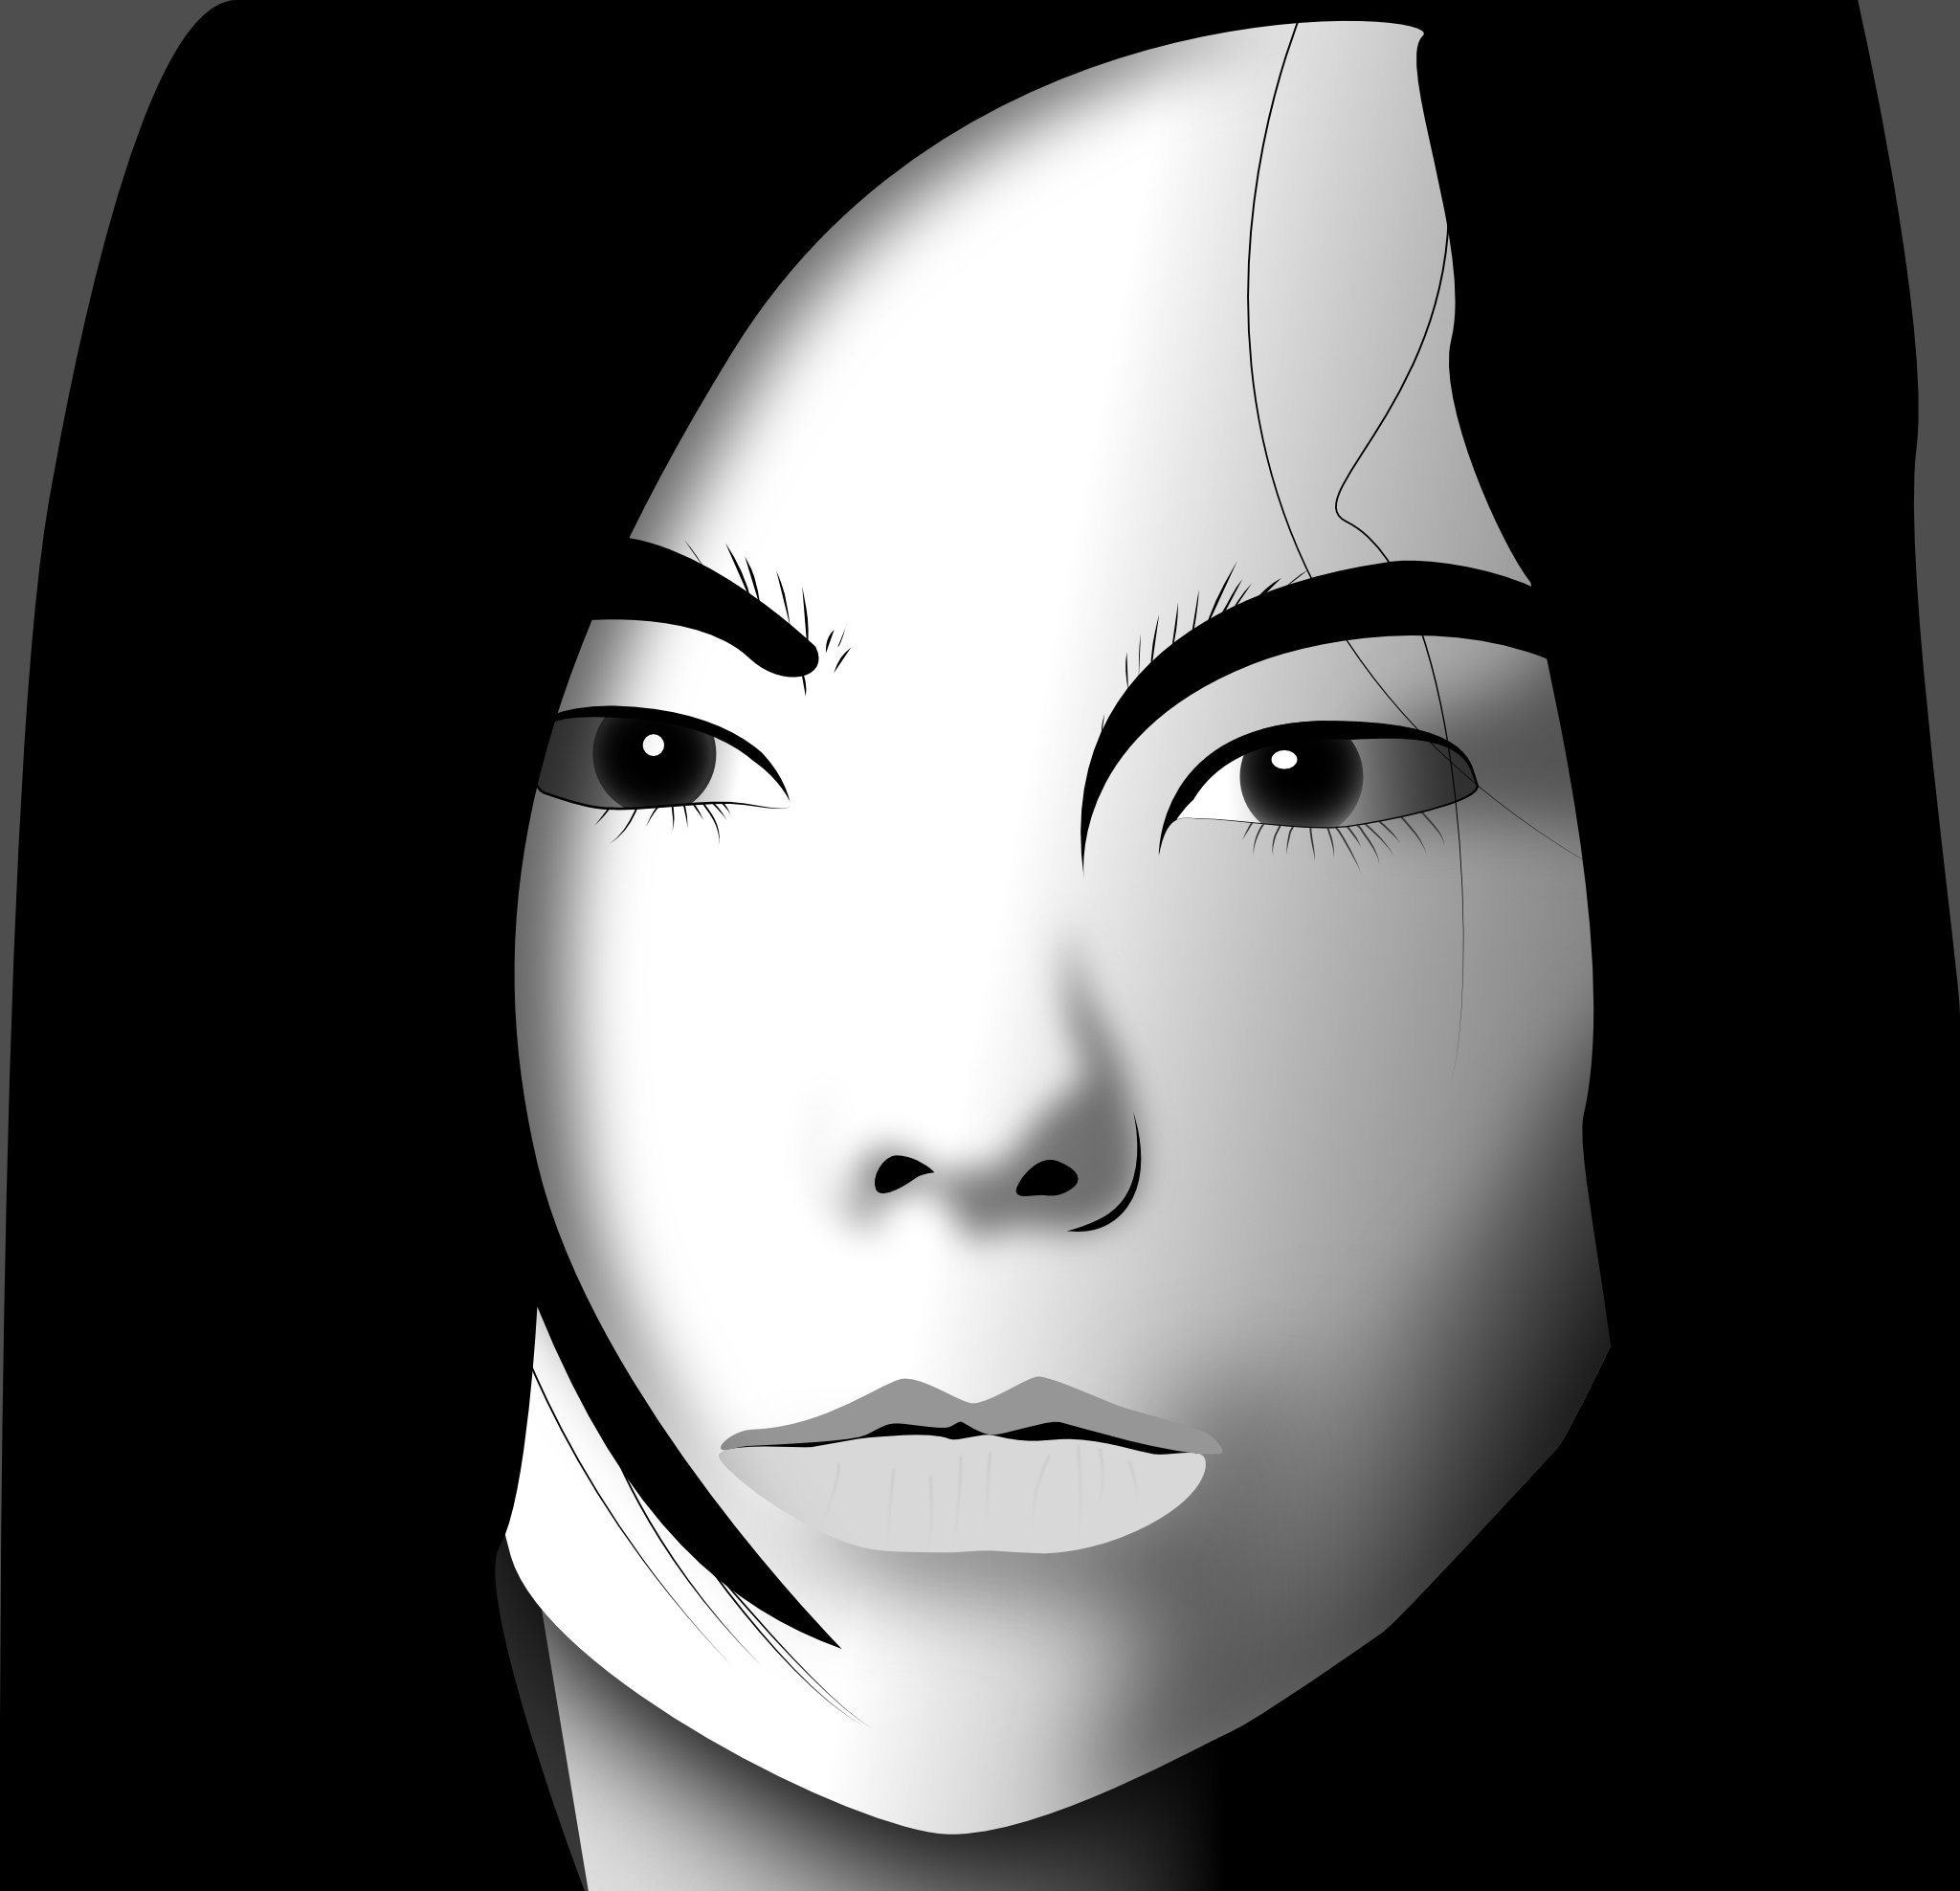 Björk, the artist from Island. Vector drawing based on a photo by Phil Nicholls (1993)